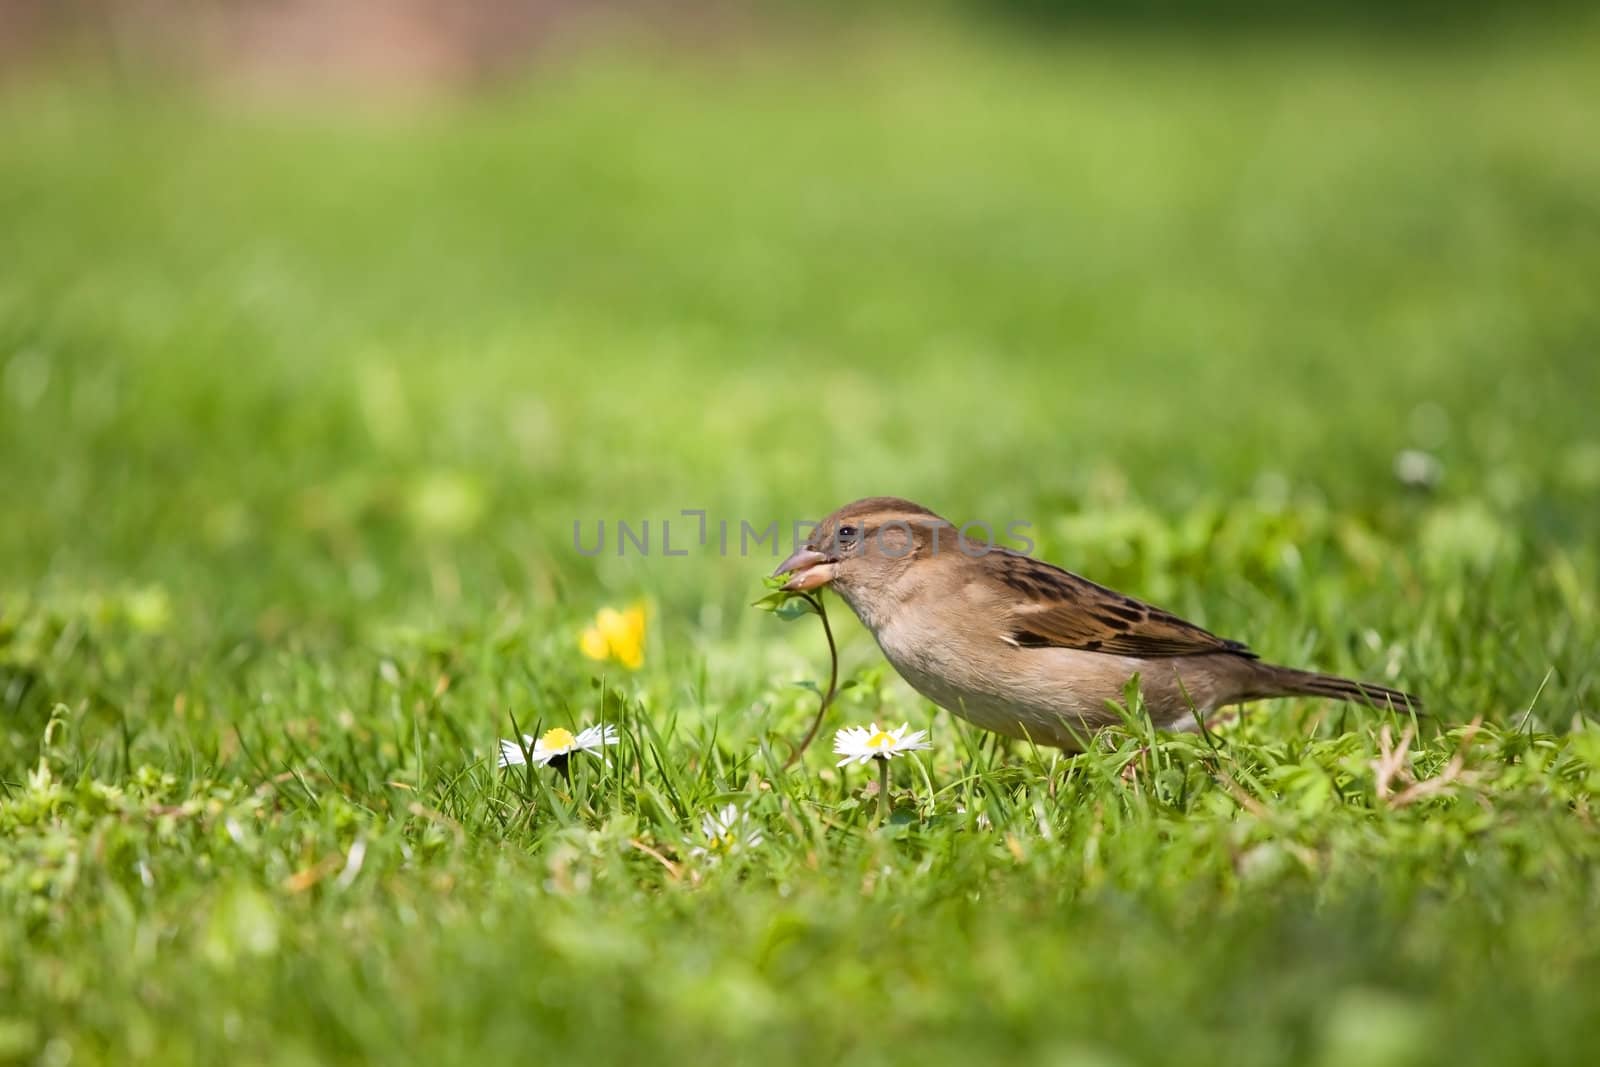 Sparrow eating lunch on the fresh grass